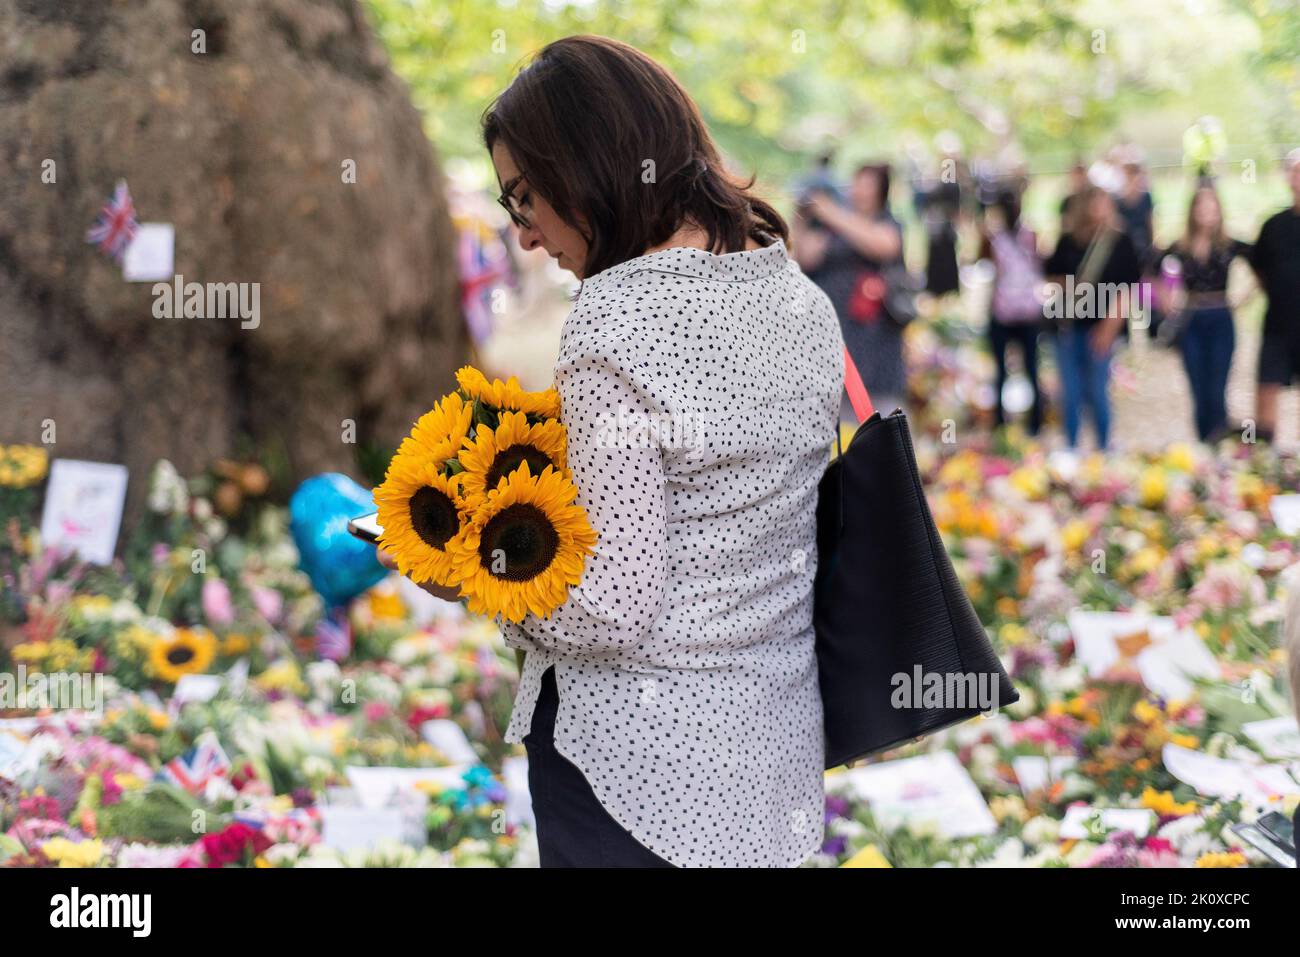 Floral Tributes to Queen Elizabeth II. London, September 2022 Stock Photo